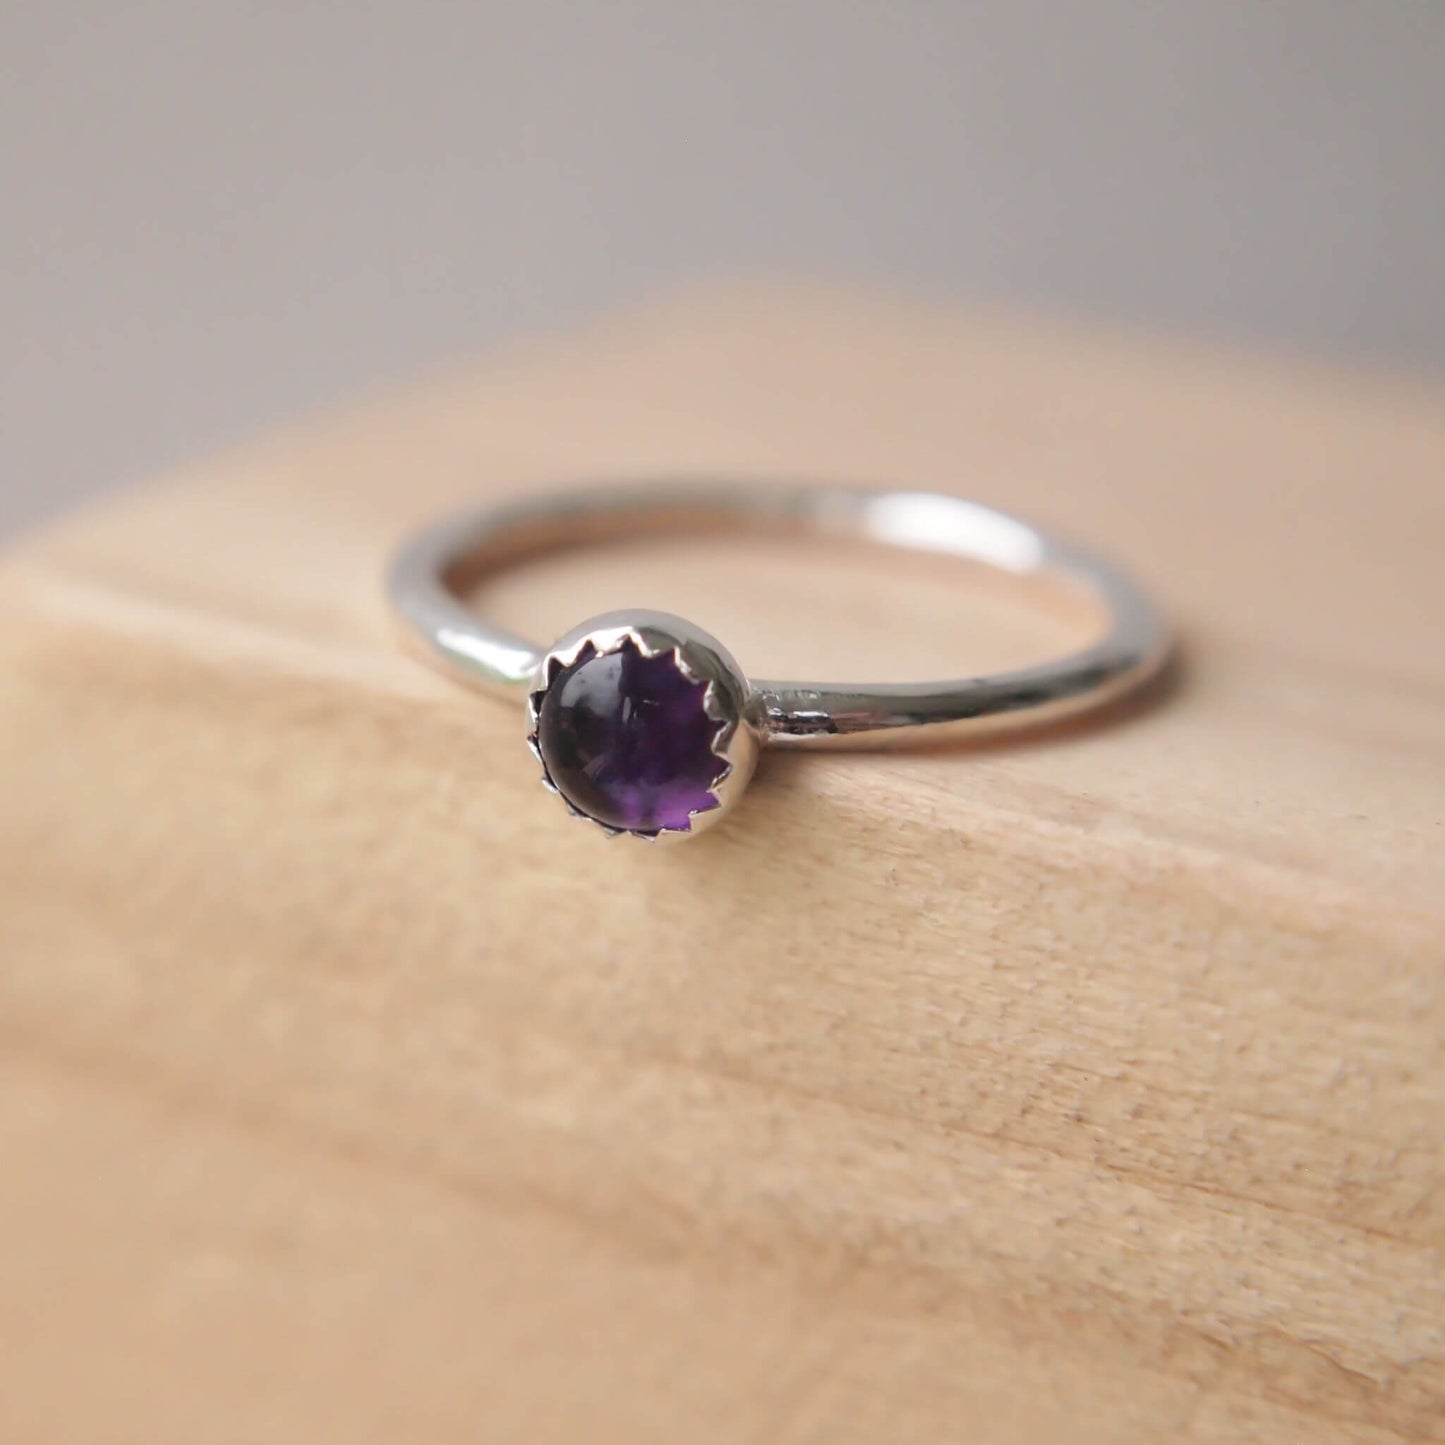 Single solitaire sterling silver ring with a round 5mm purple Amethyst. The ring is made in a modern simple style with a 5mm round cabochon set onto a modern halo fully round band. Made to order to your ring size, and handmade in scotland by maram jewellery